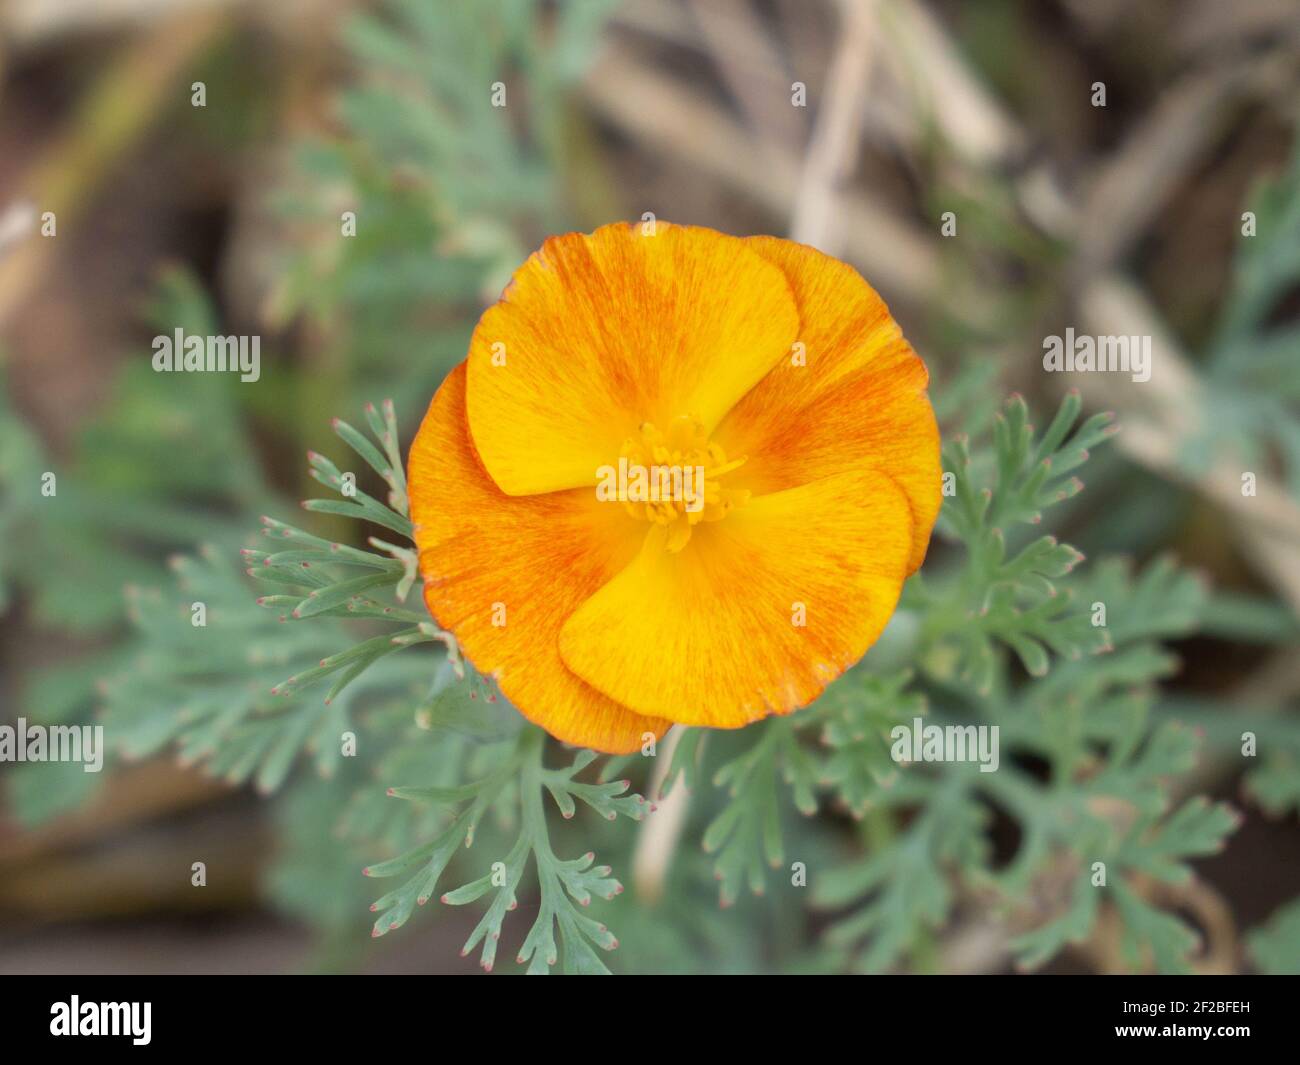 Ranunculus creeping lonely flower in the center of the photo on a blurred background. Color gradient from yellow to orange. Stock Photo